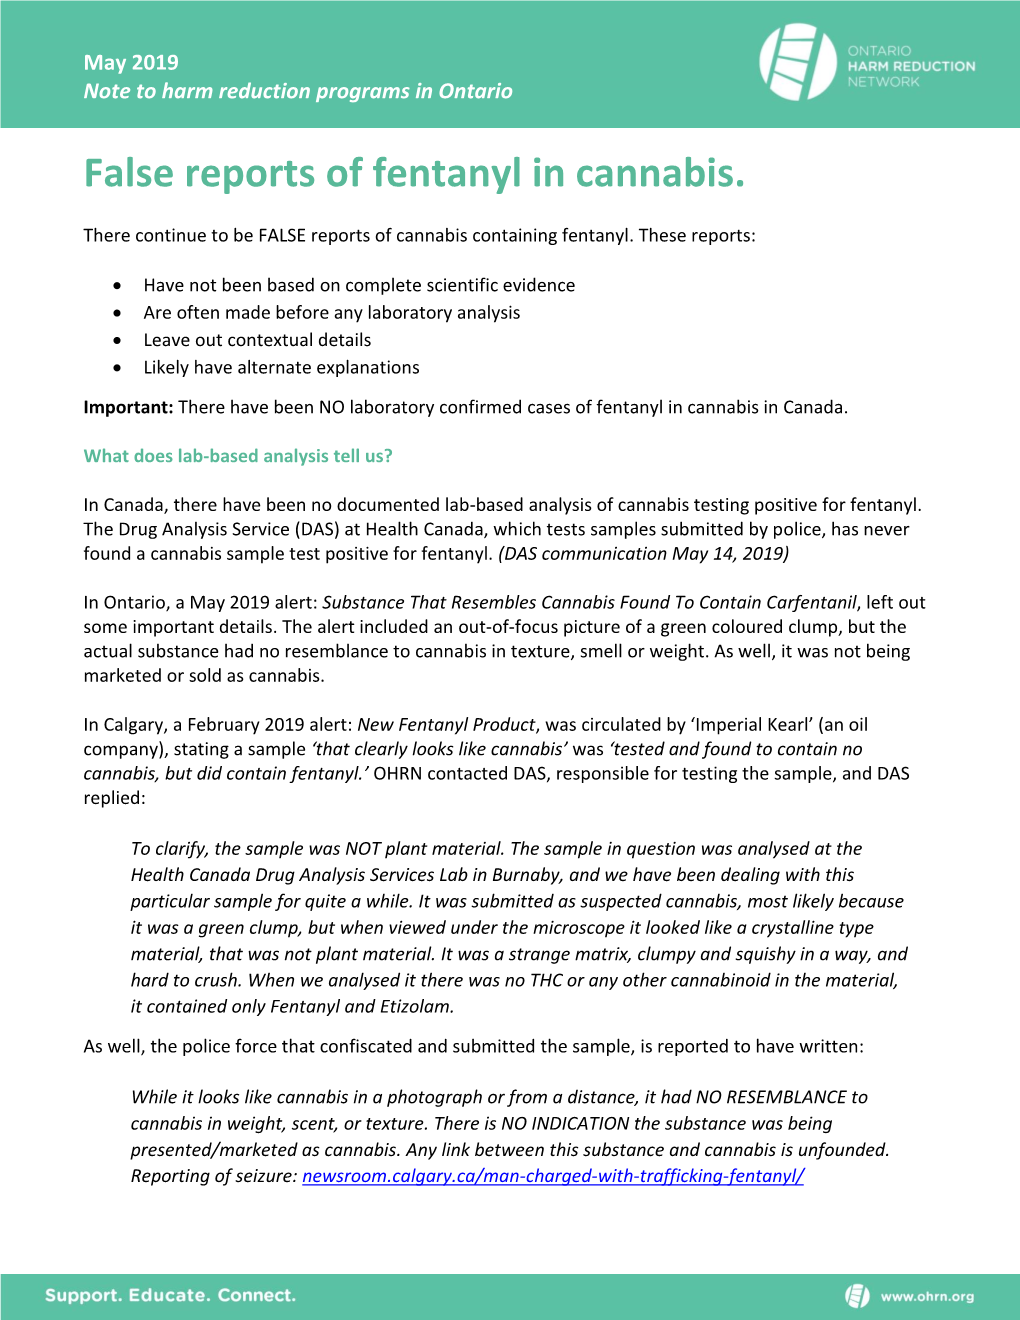 False Reports of Fentanyl in Cannabis